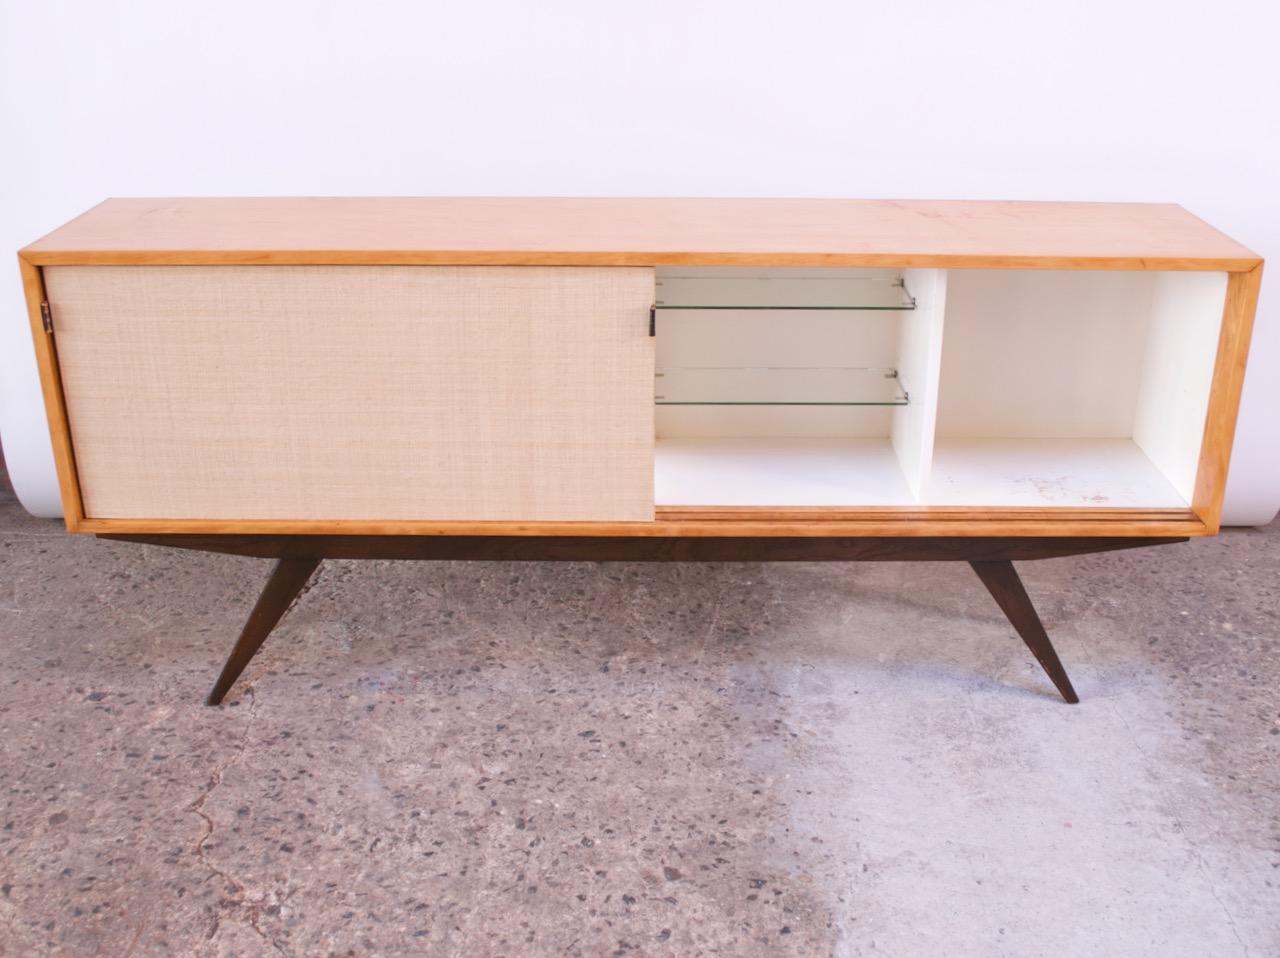 Stained Early Florence Knoll Credenza / Cabinet in Mahogany, Birch, and Grasscloth